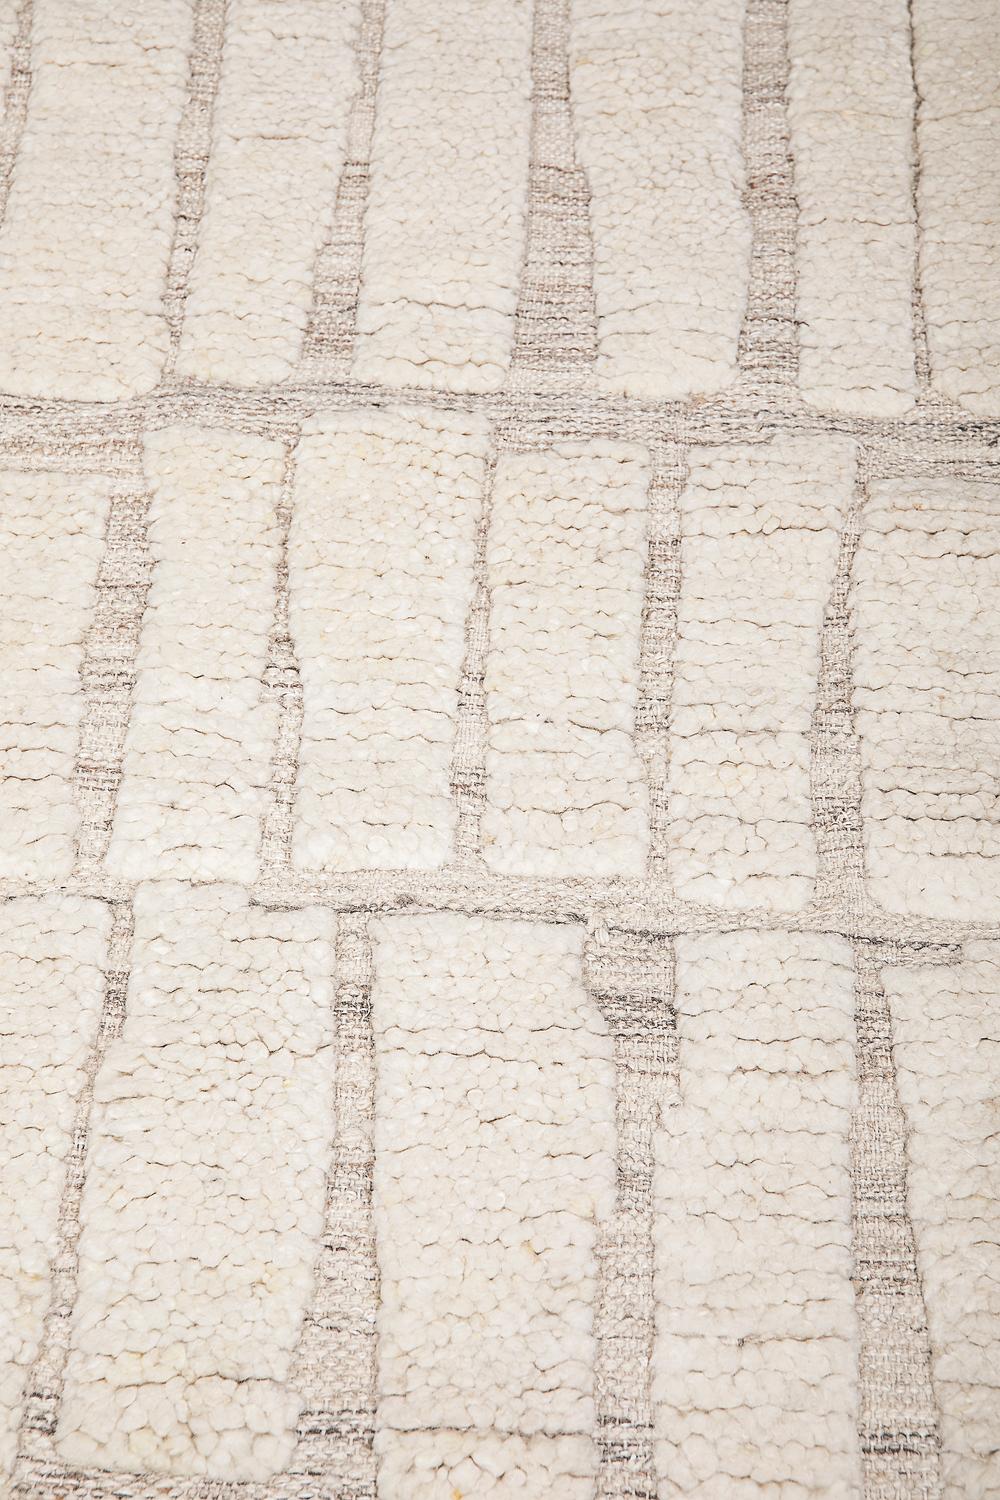 This rug has been ethically hand Knotted in the finest wool yarns by artisans in north of India. The greige part has a thickness of 6mm and the white part is 20mm.
Each rug is handknotted with irregular details to create beautiful imperfections that